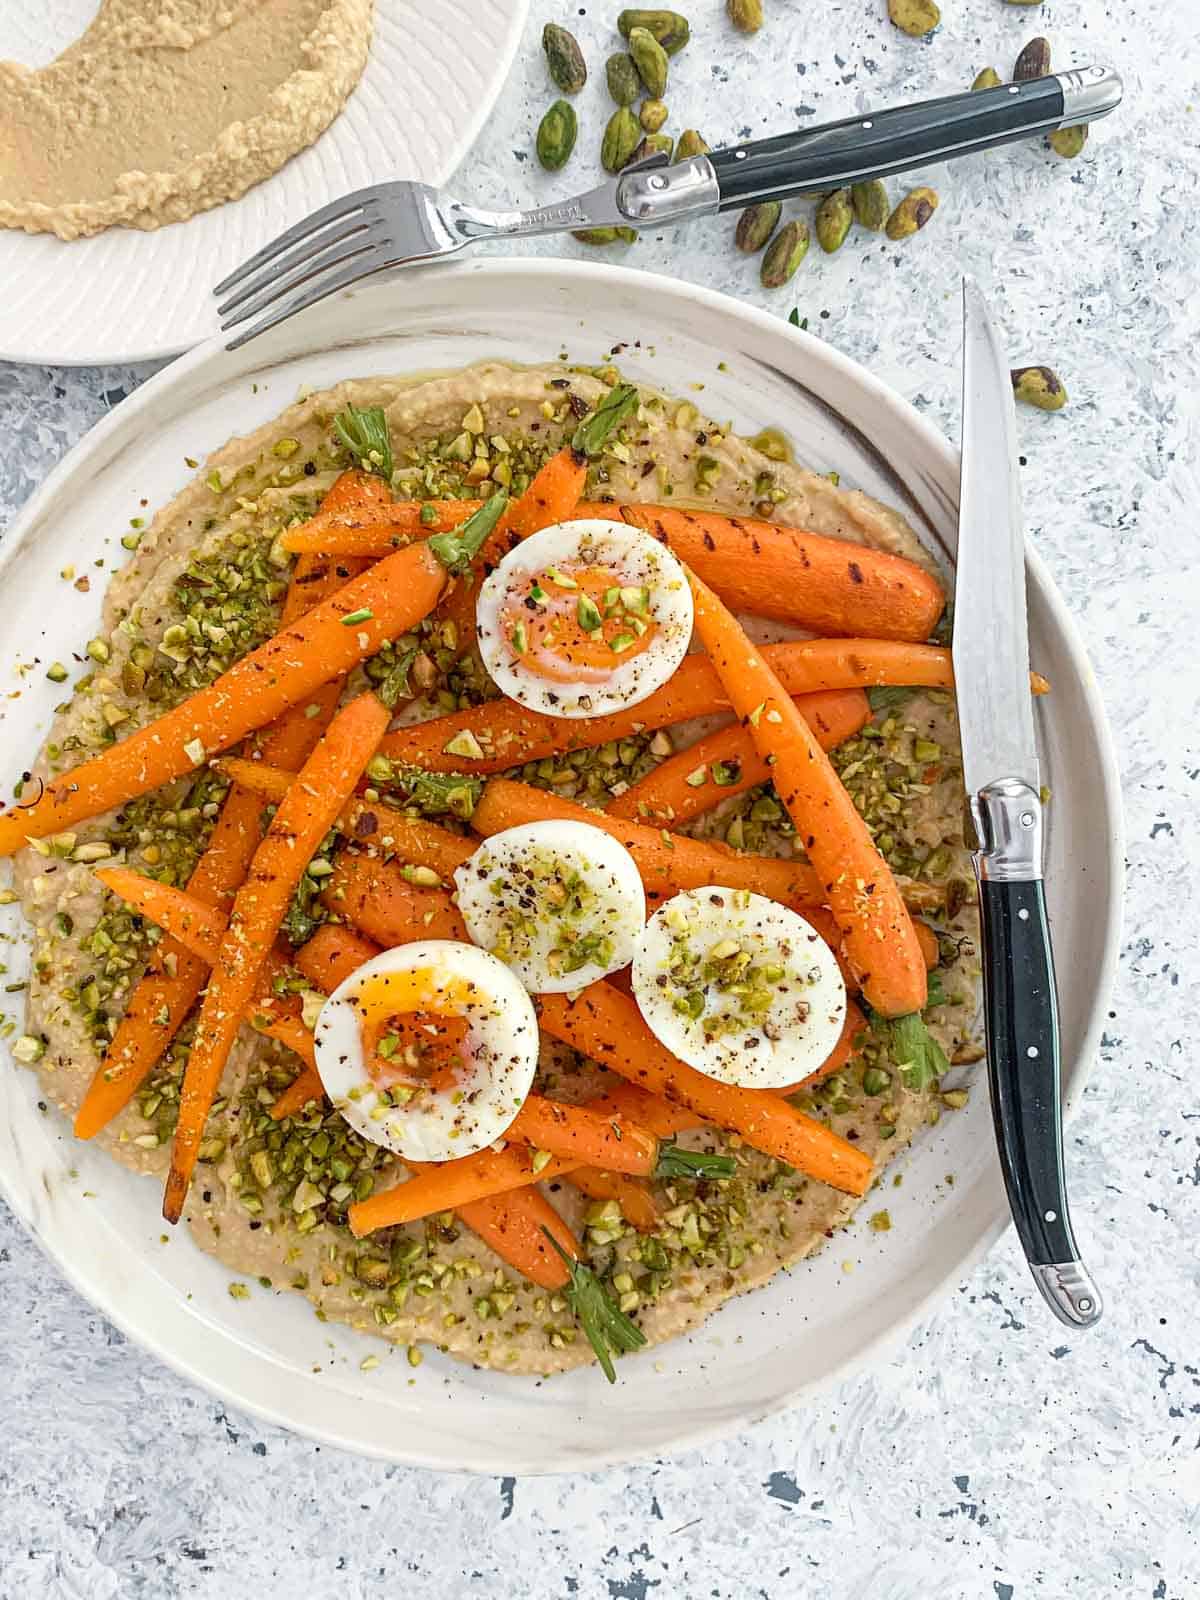 Enjoy the creaminess of this Dutch carrot salad without the use of any dairy. The combination of the hummus and the oozing soft-boiled eggs provide for a velvety alternative. Add in the crunch of the pistachios and you have a delectable side salad.